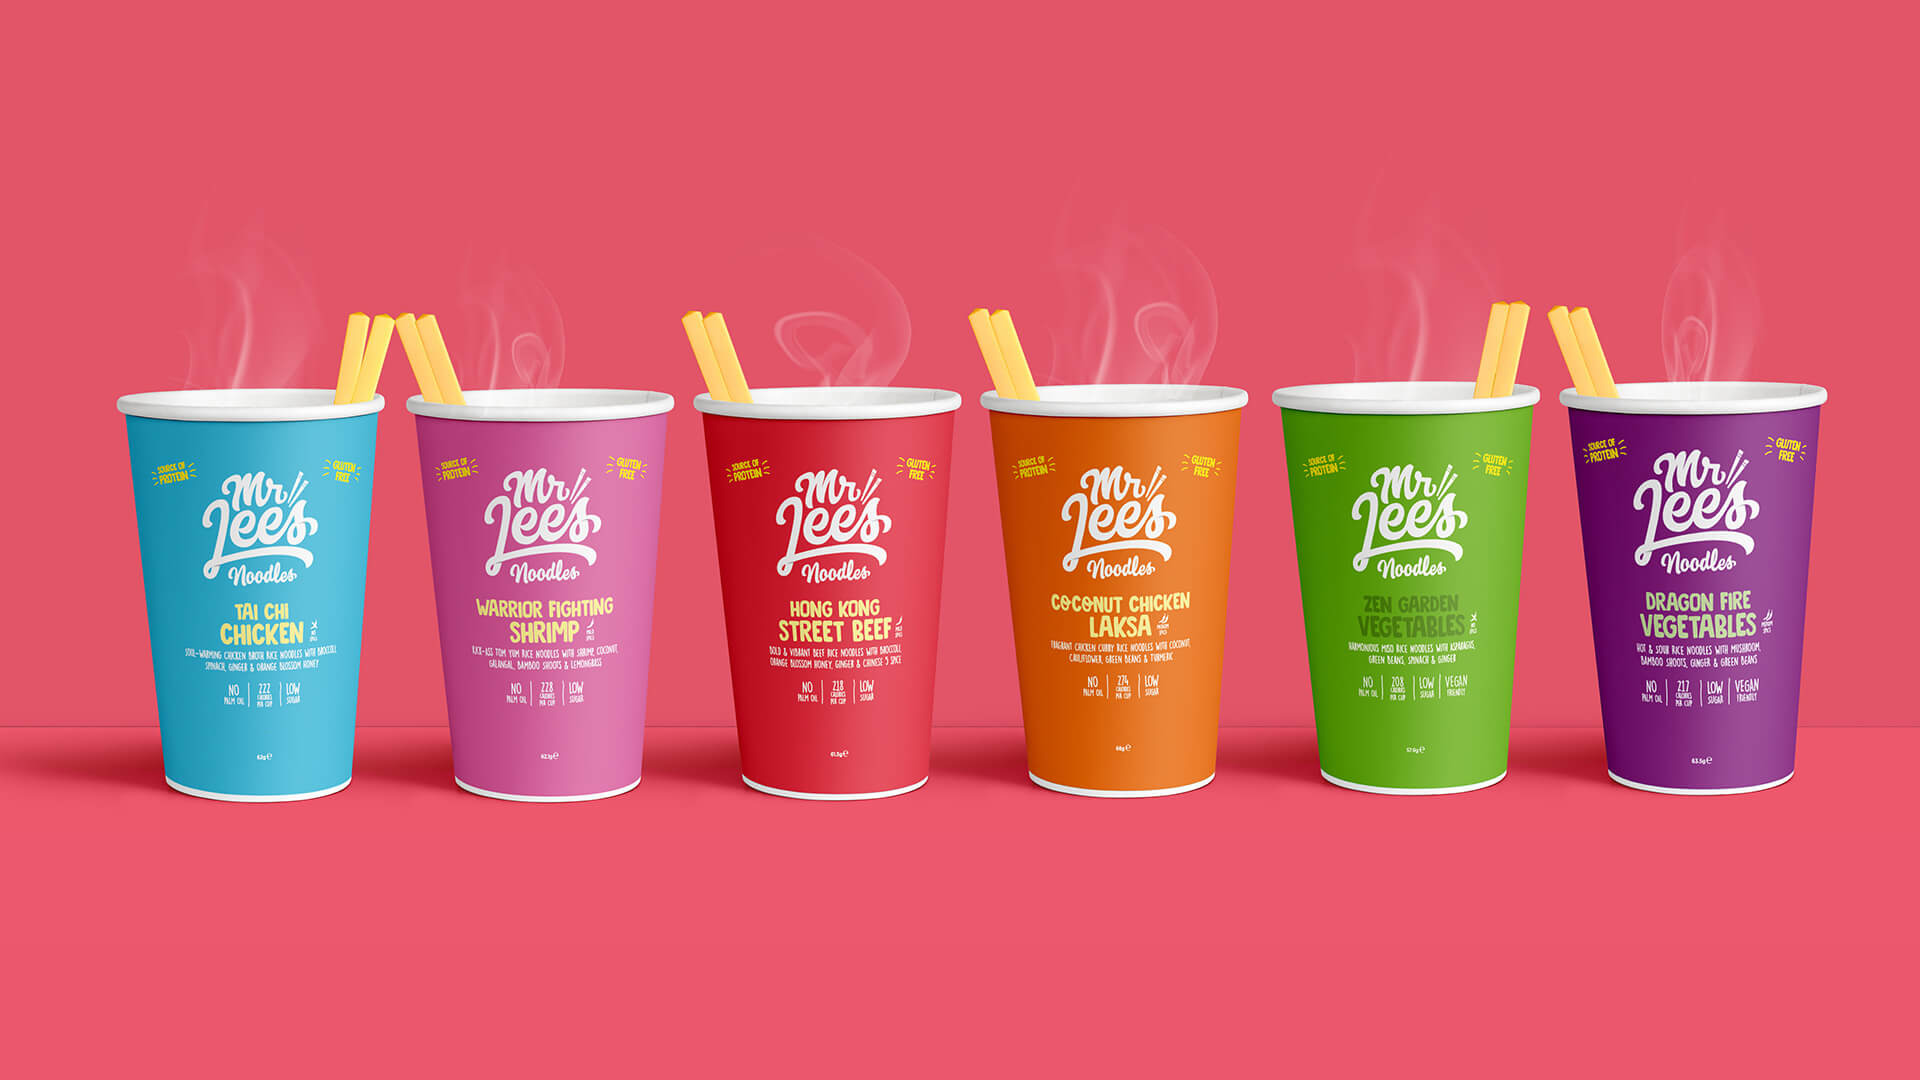 New reformulated Mr Lee's noodles are here! - Lux Magazine